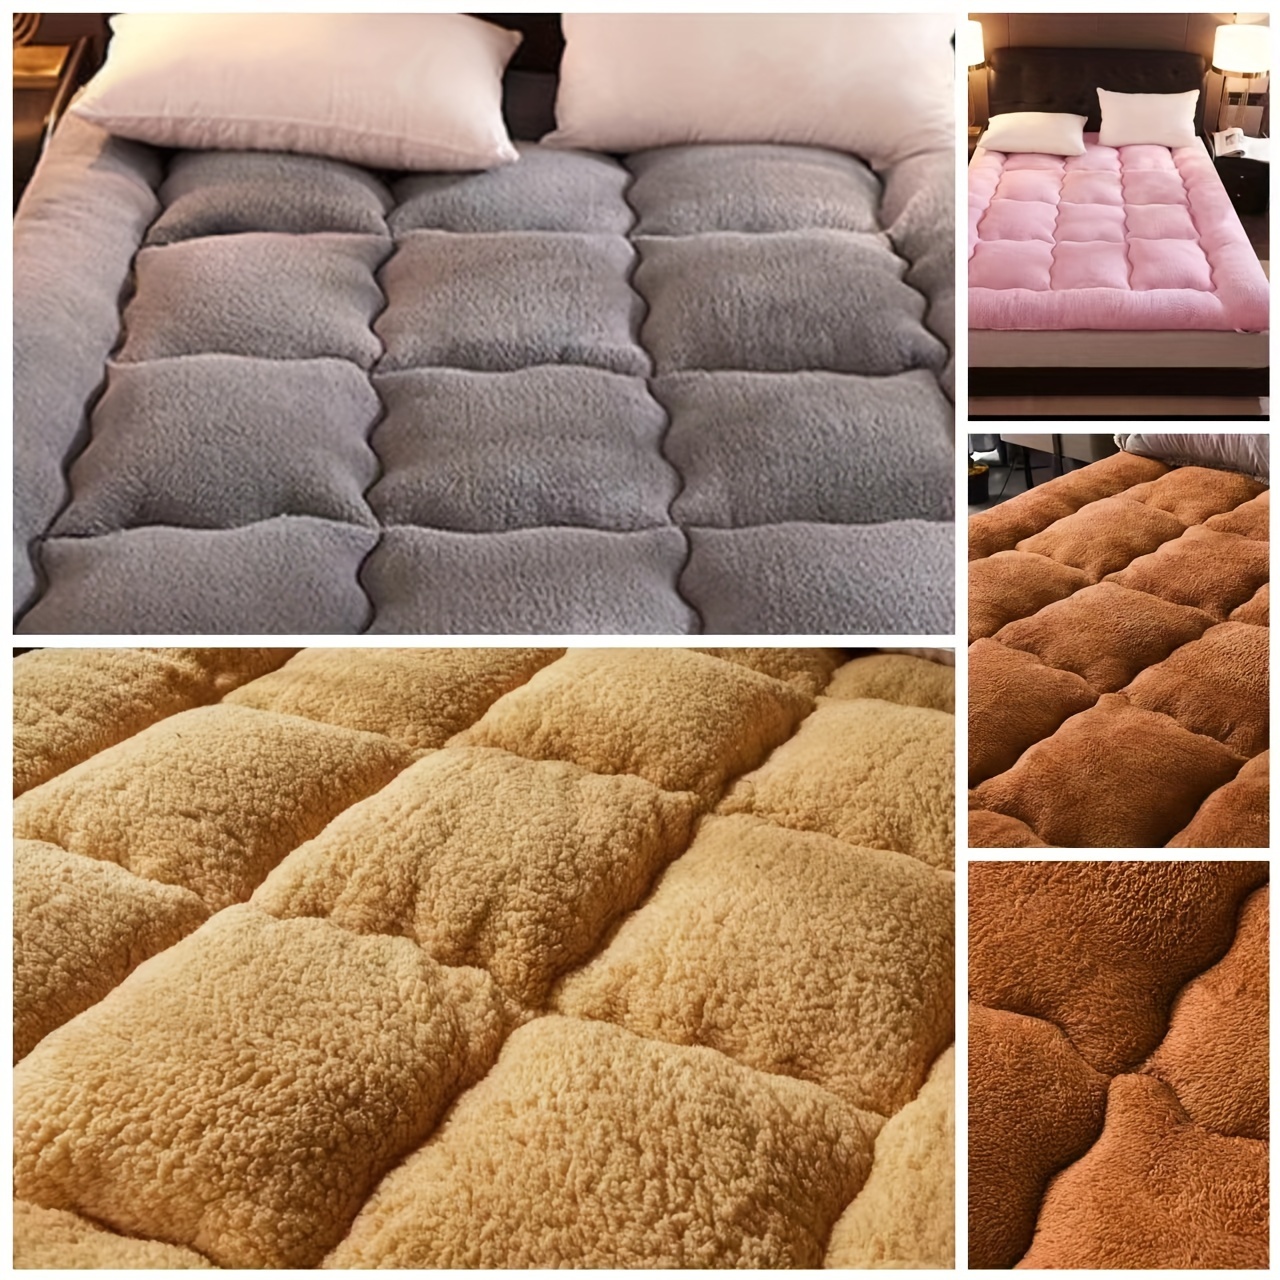 

polyester Crafted" Ultra-warm Plush Fleece Mattress Pad - Stain Resistant, Soft & Cozy Bedding For All Seasons